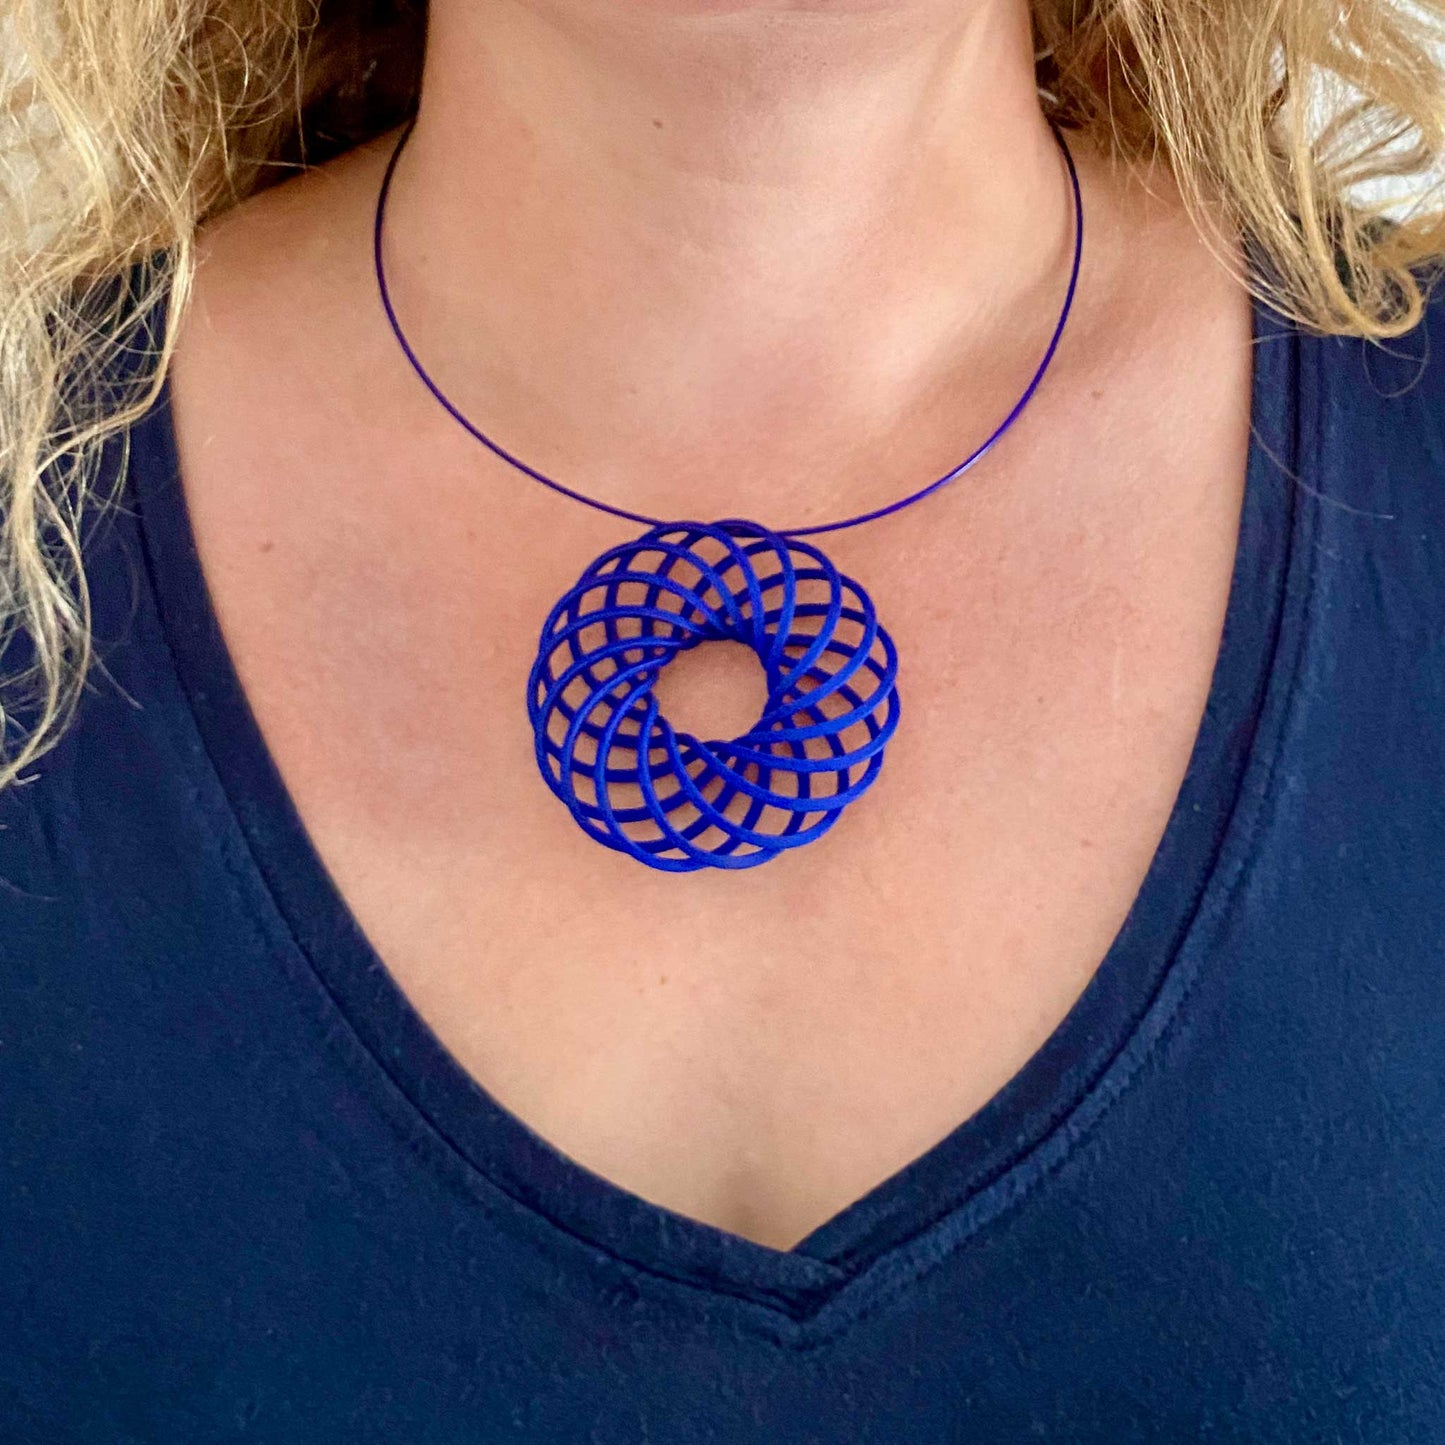 Katy wearing the large blue 3D printed vortex pendant by Katy Luxton